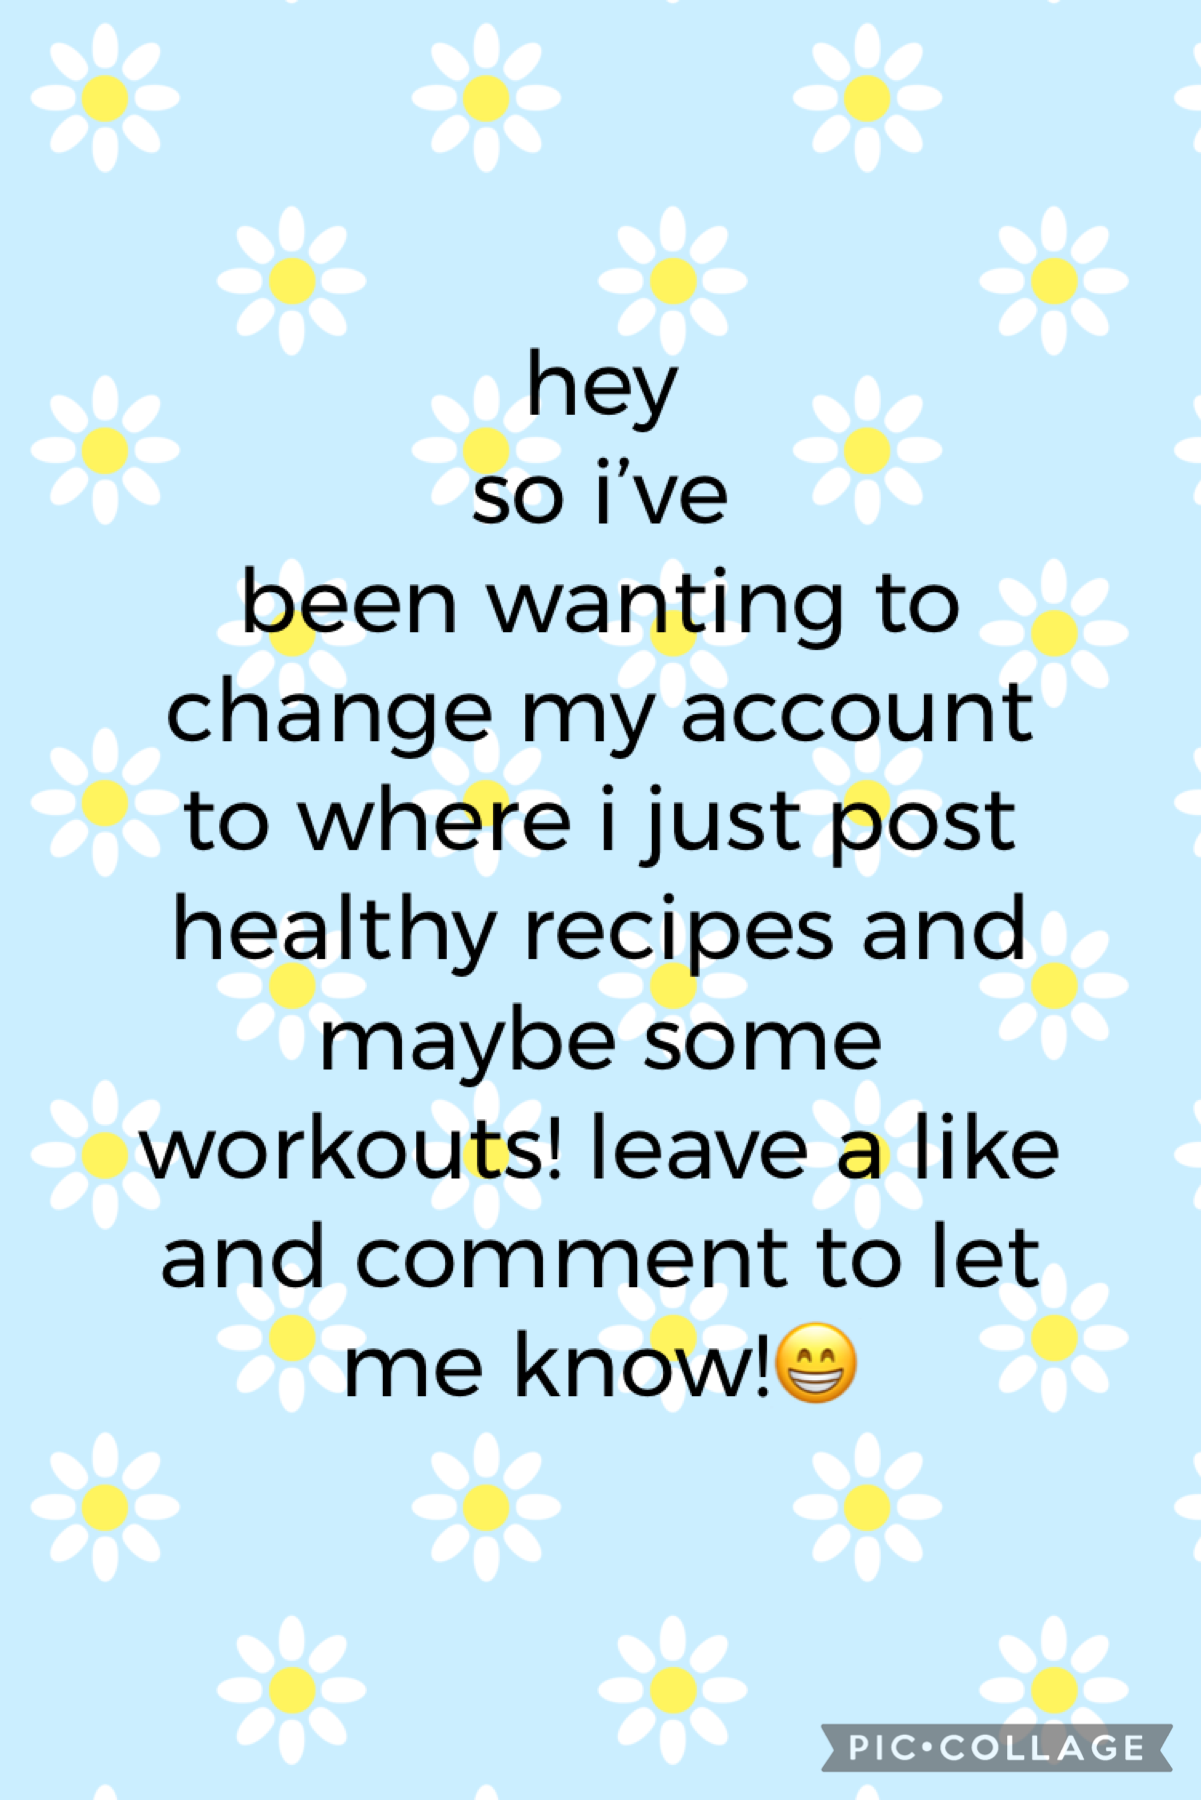 plz let me know. i don’t want to change my account unless u guys r ok with it. also how do i change my account name?
thx! and love y’all 